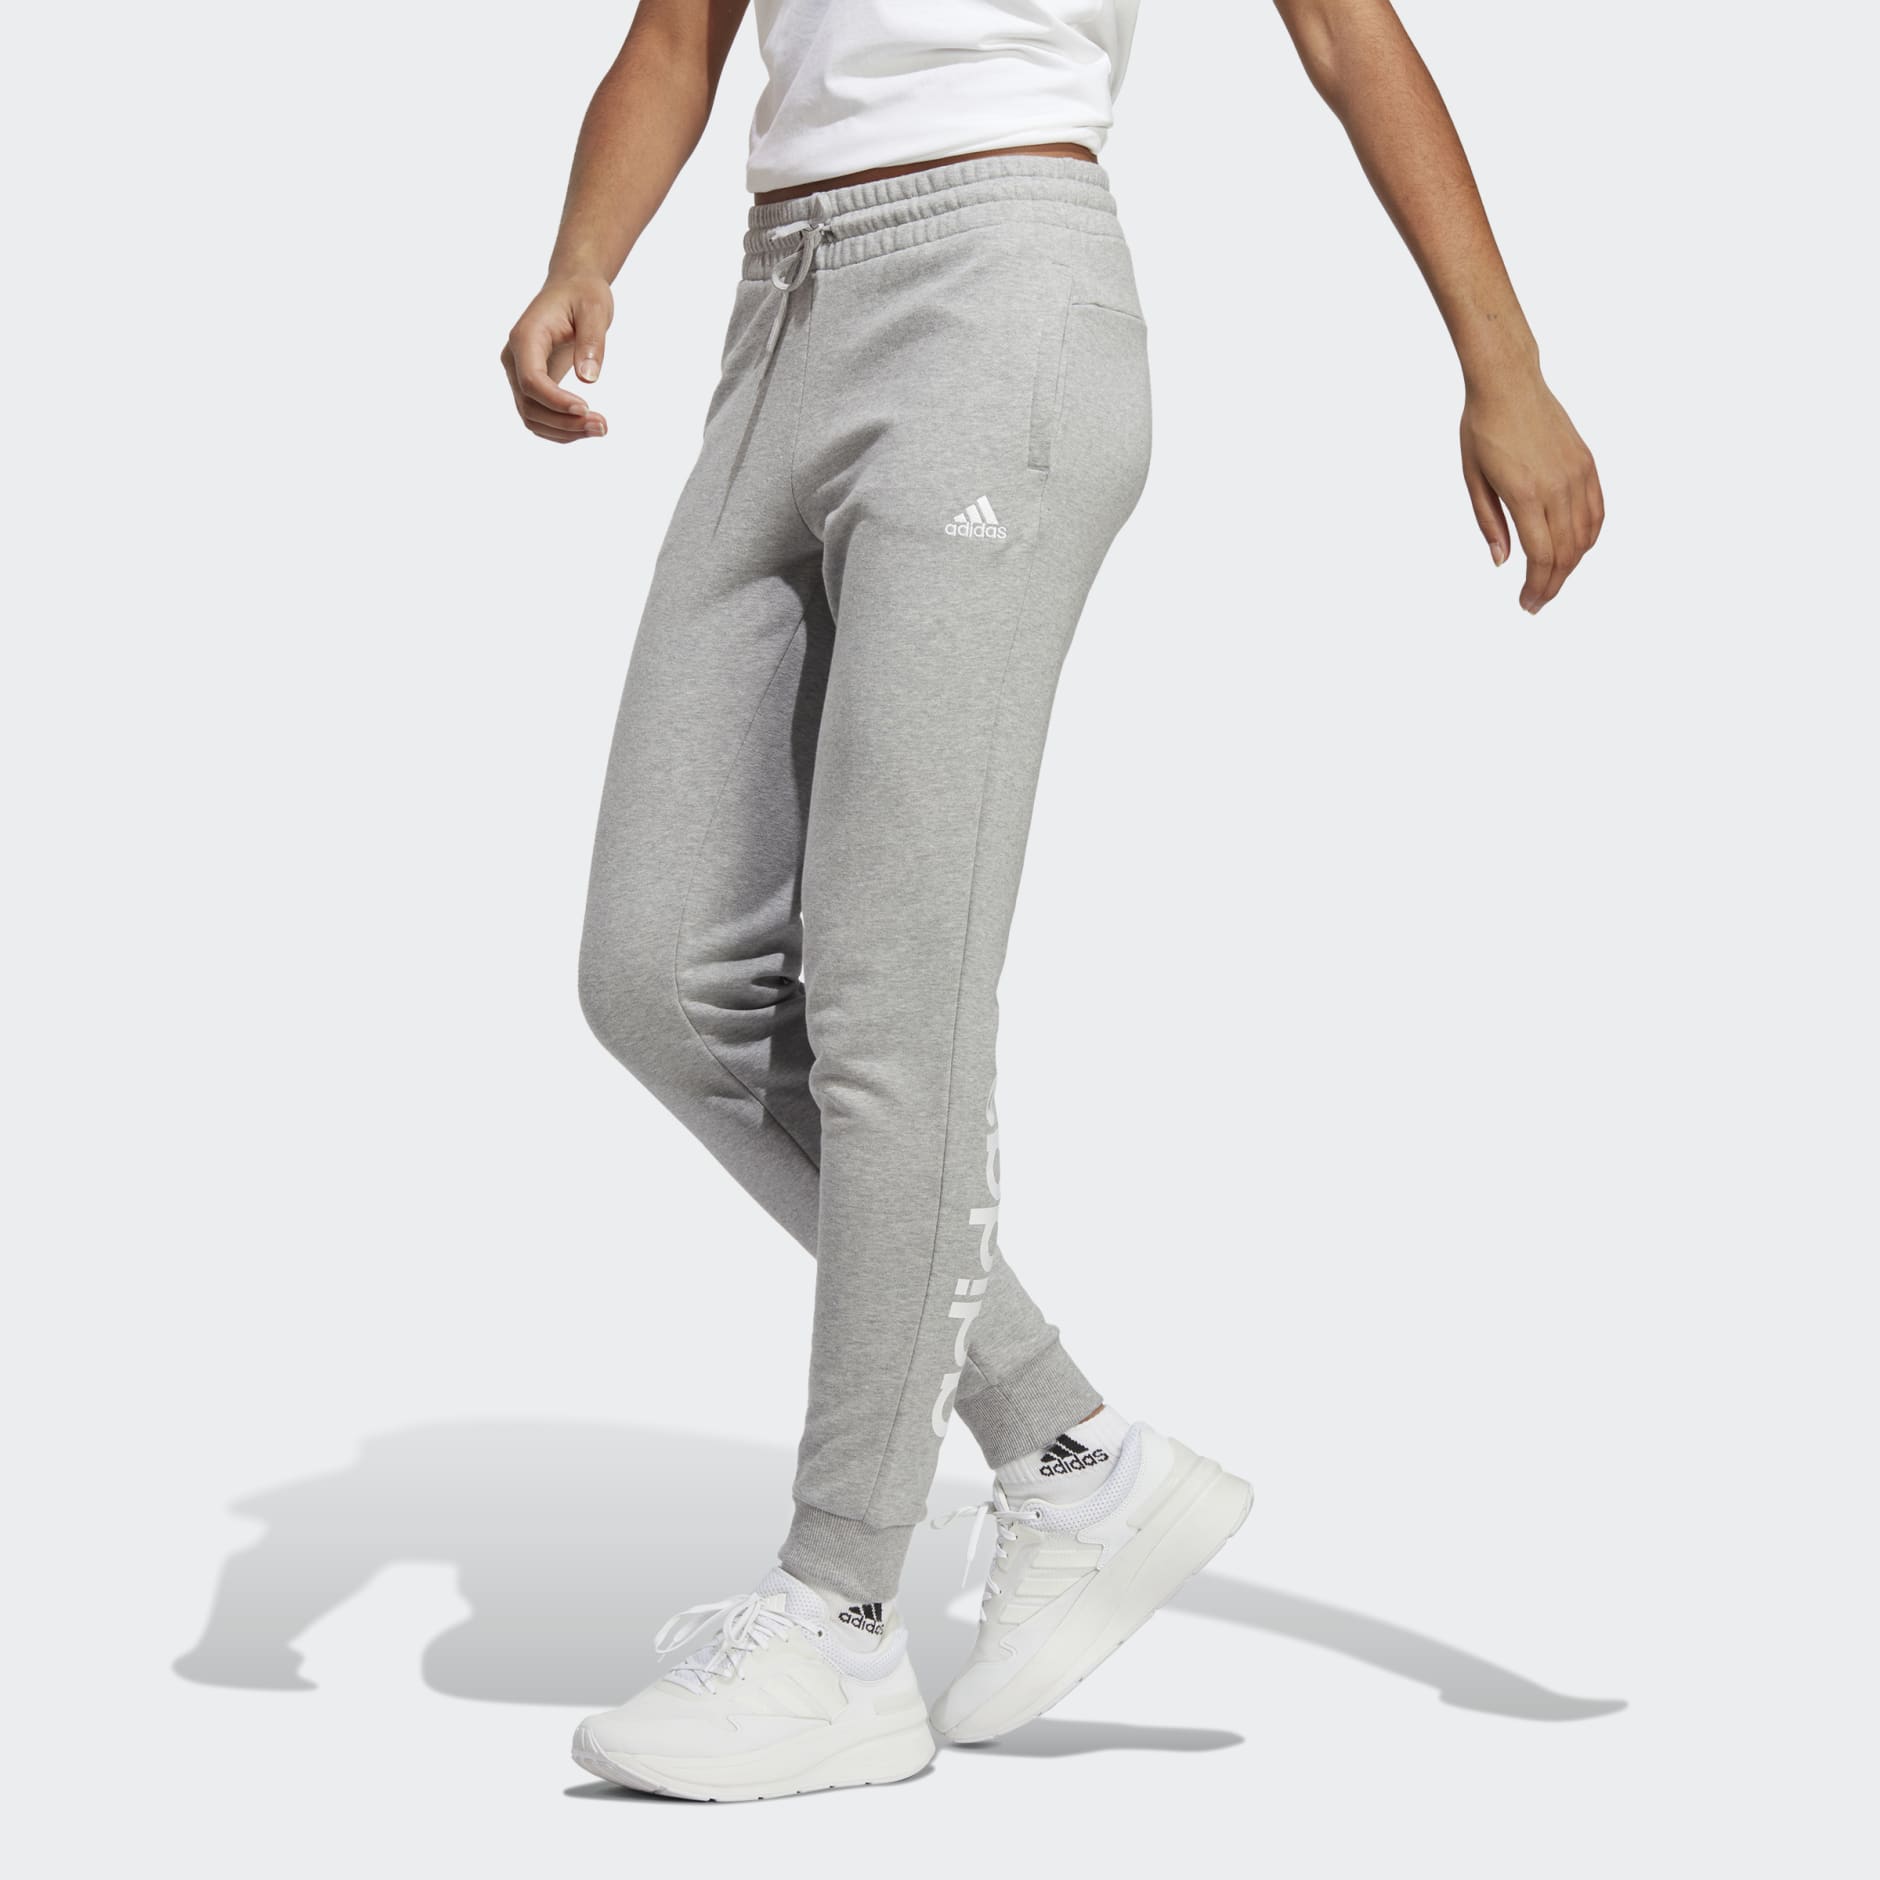 Adidas pants women  Adidas pants women, Sporty outfits, Adidas outfit